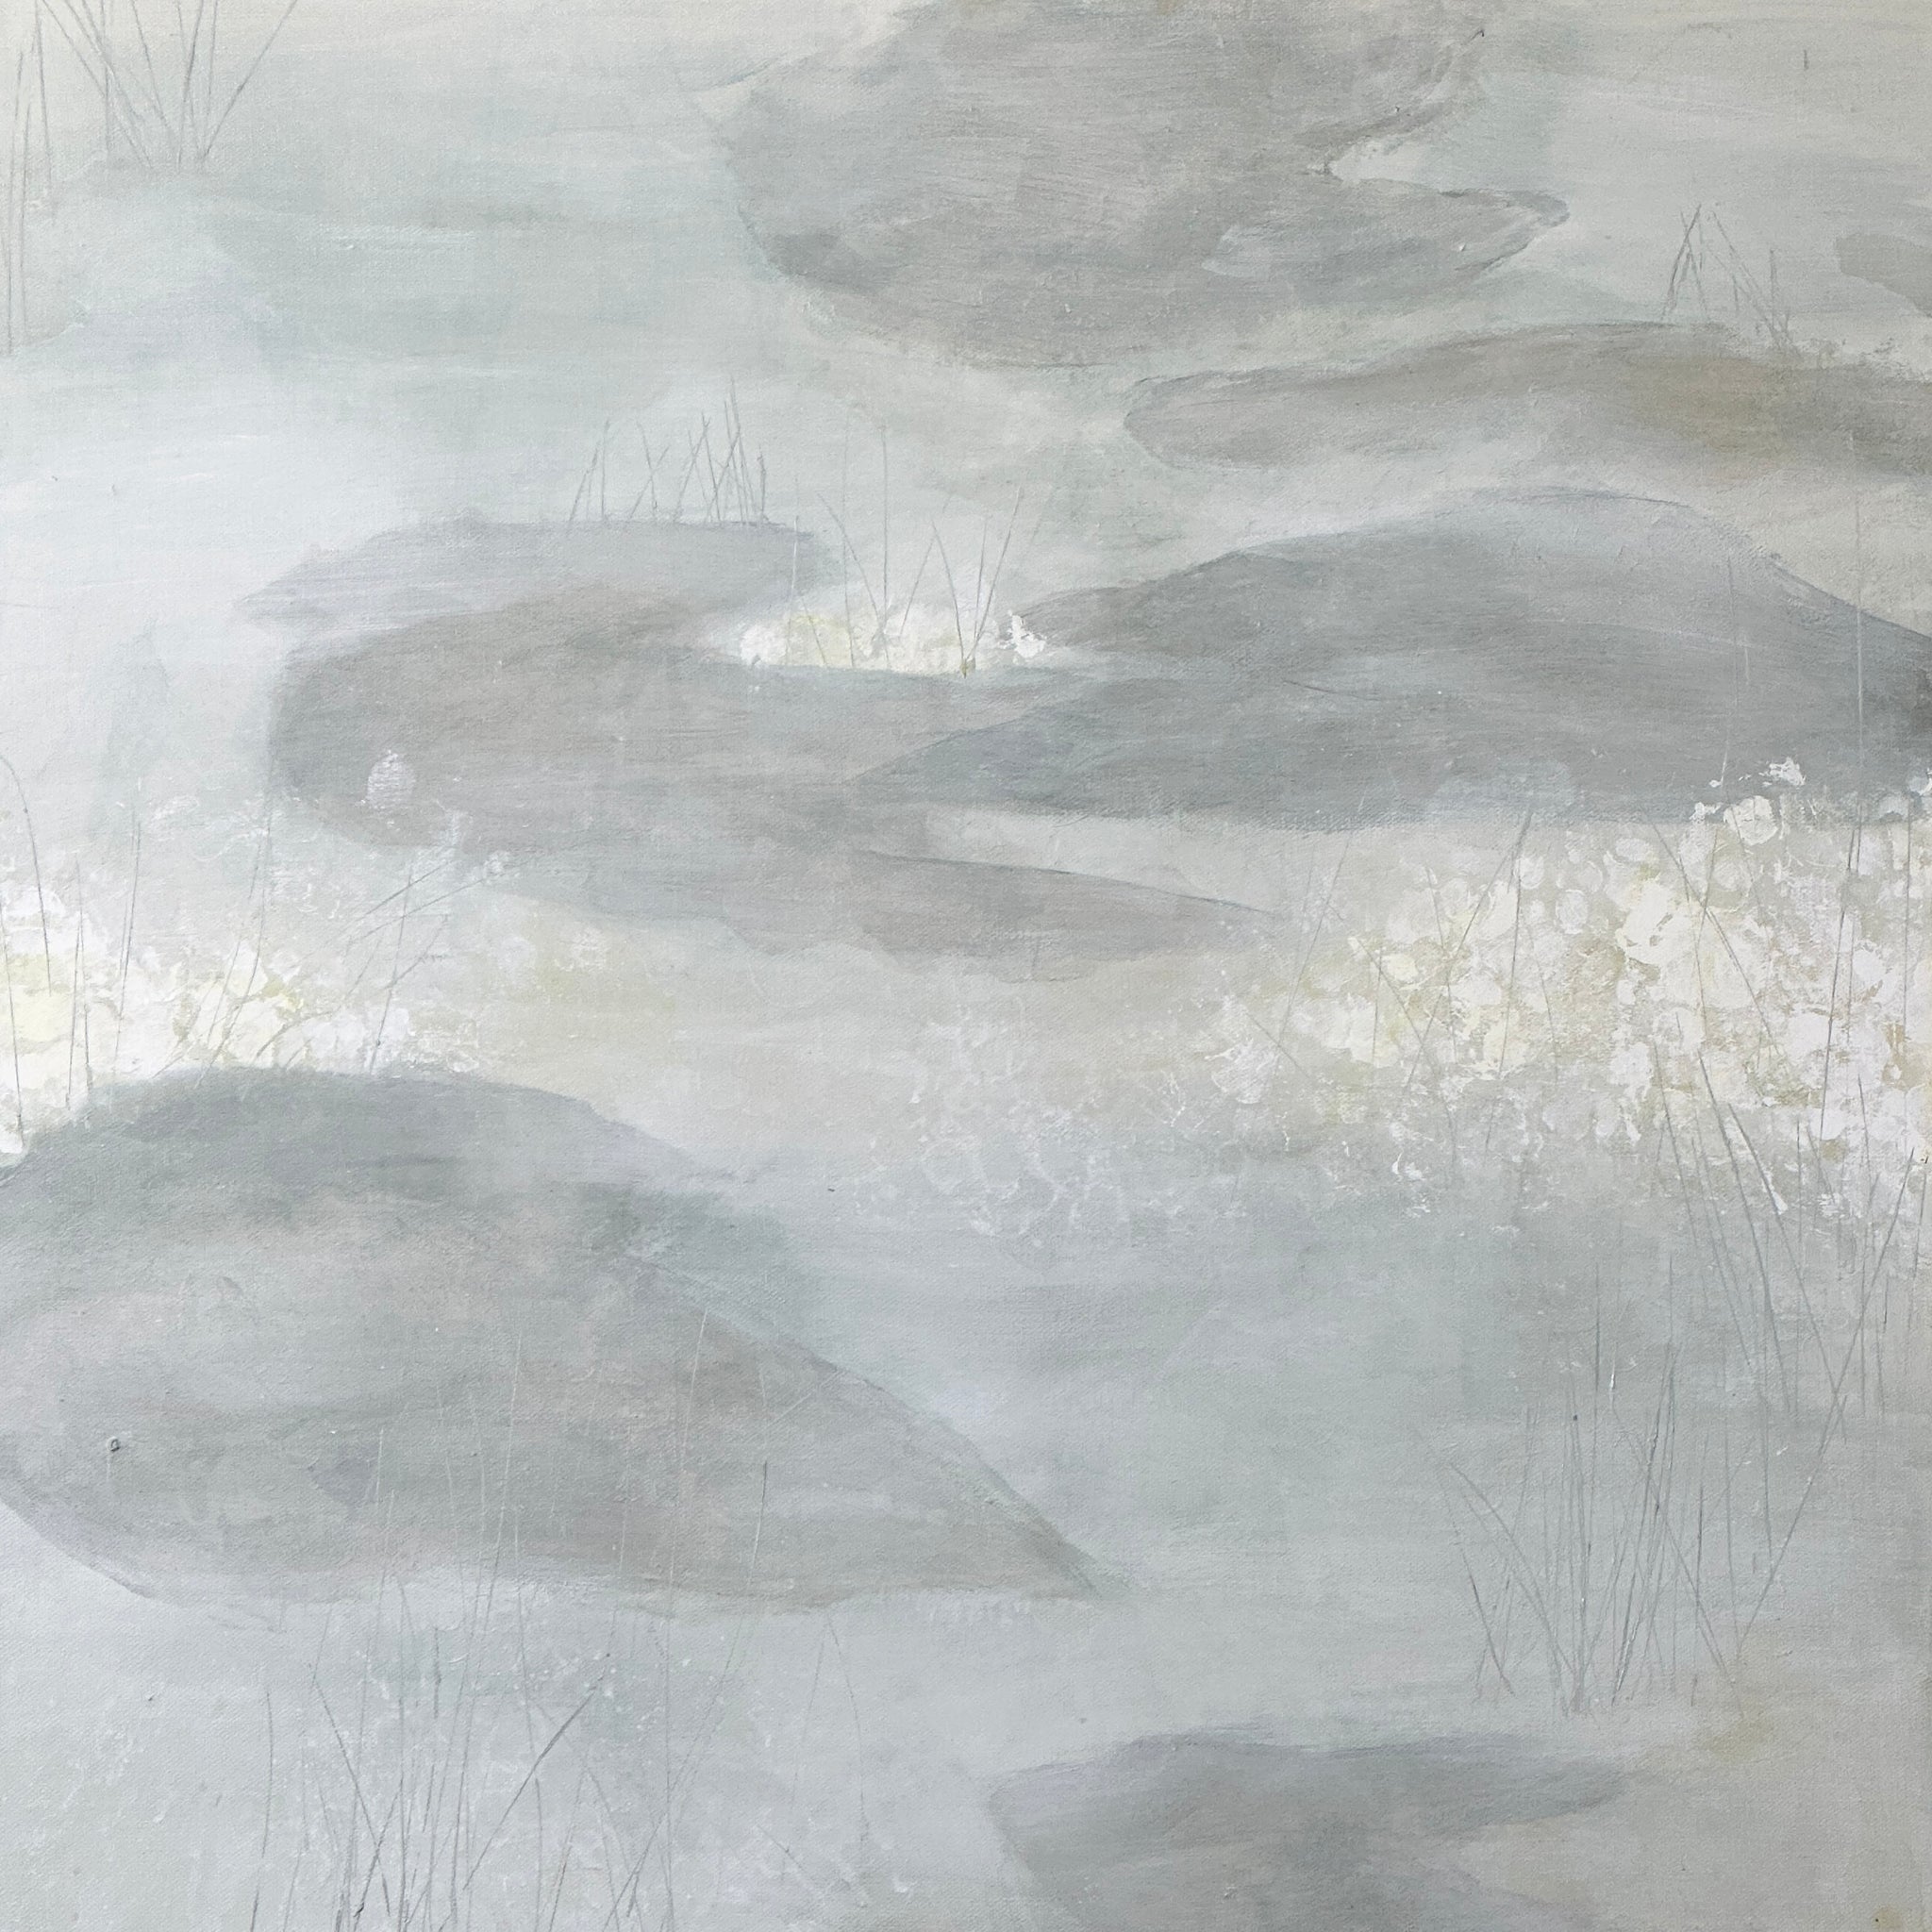 The Pond in February 2, From the Nature’s Botanics Portfolio, 2023, Acrylic on canvas, 24 x 24 inches.